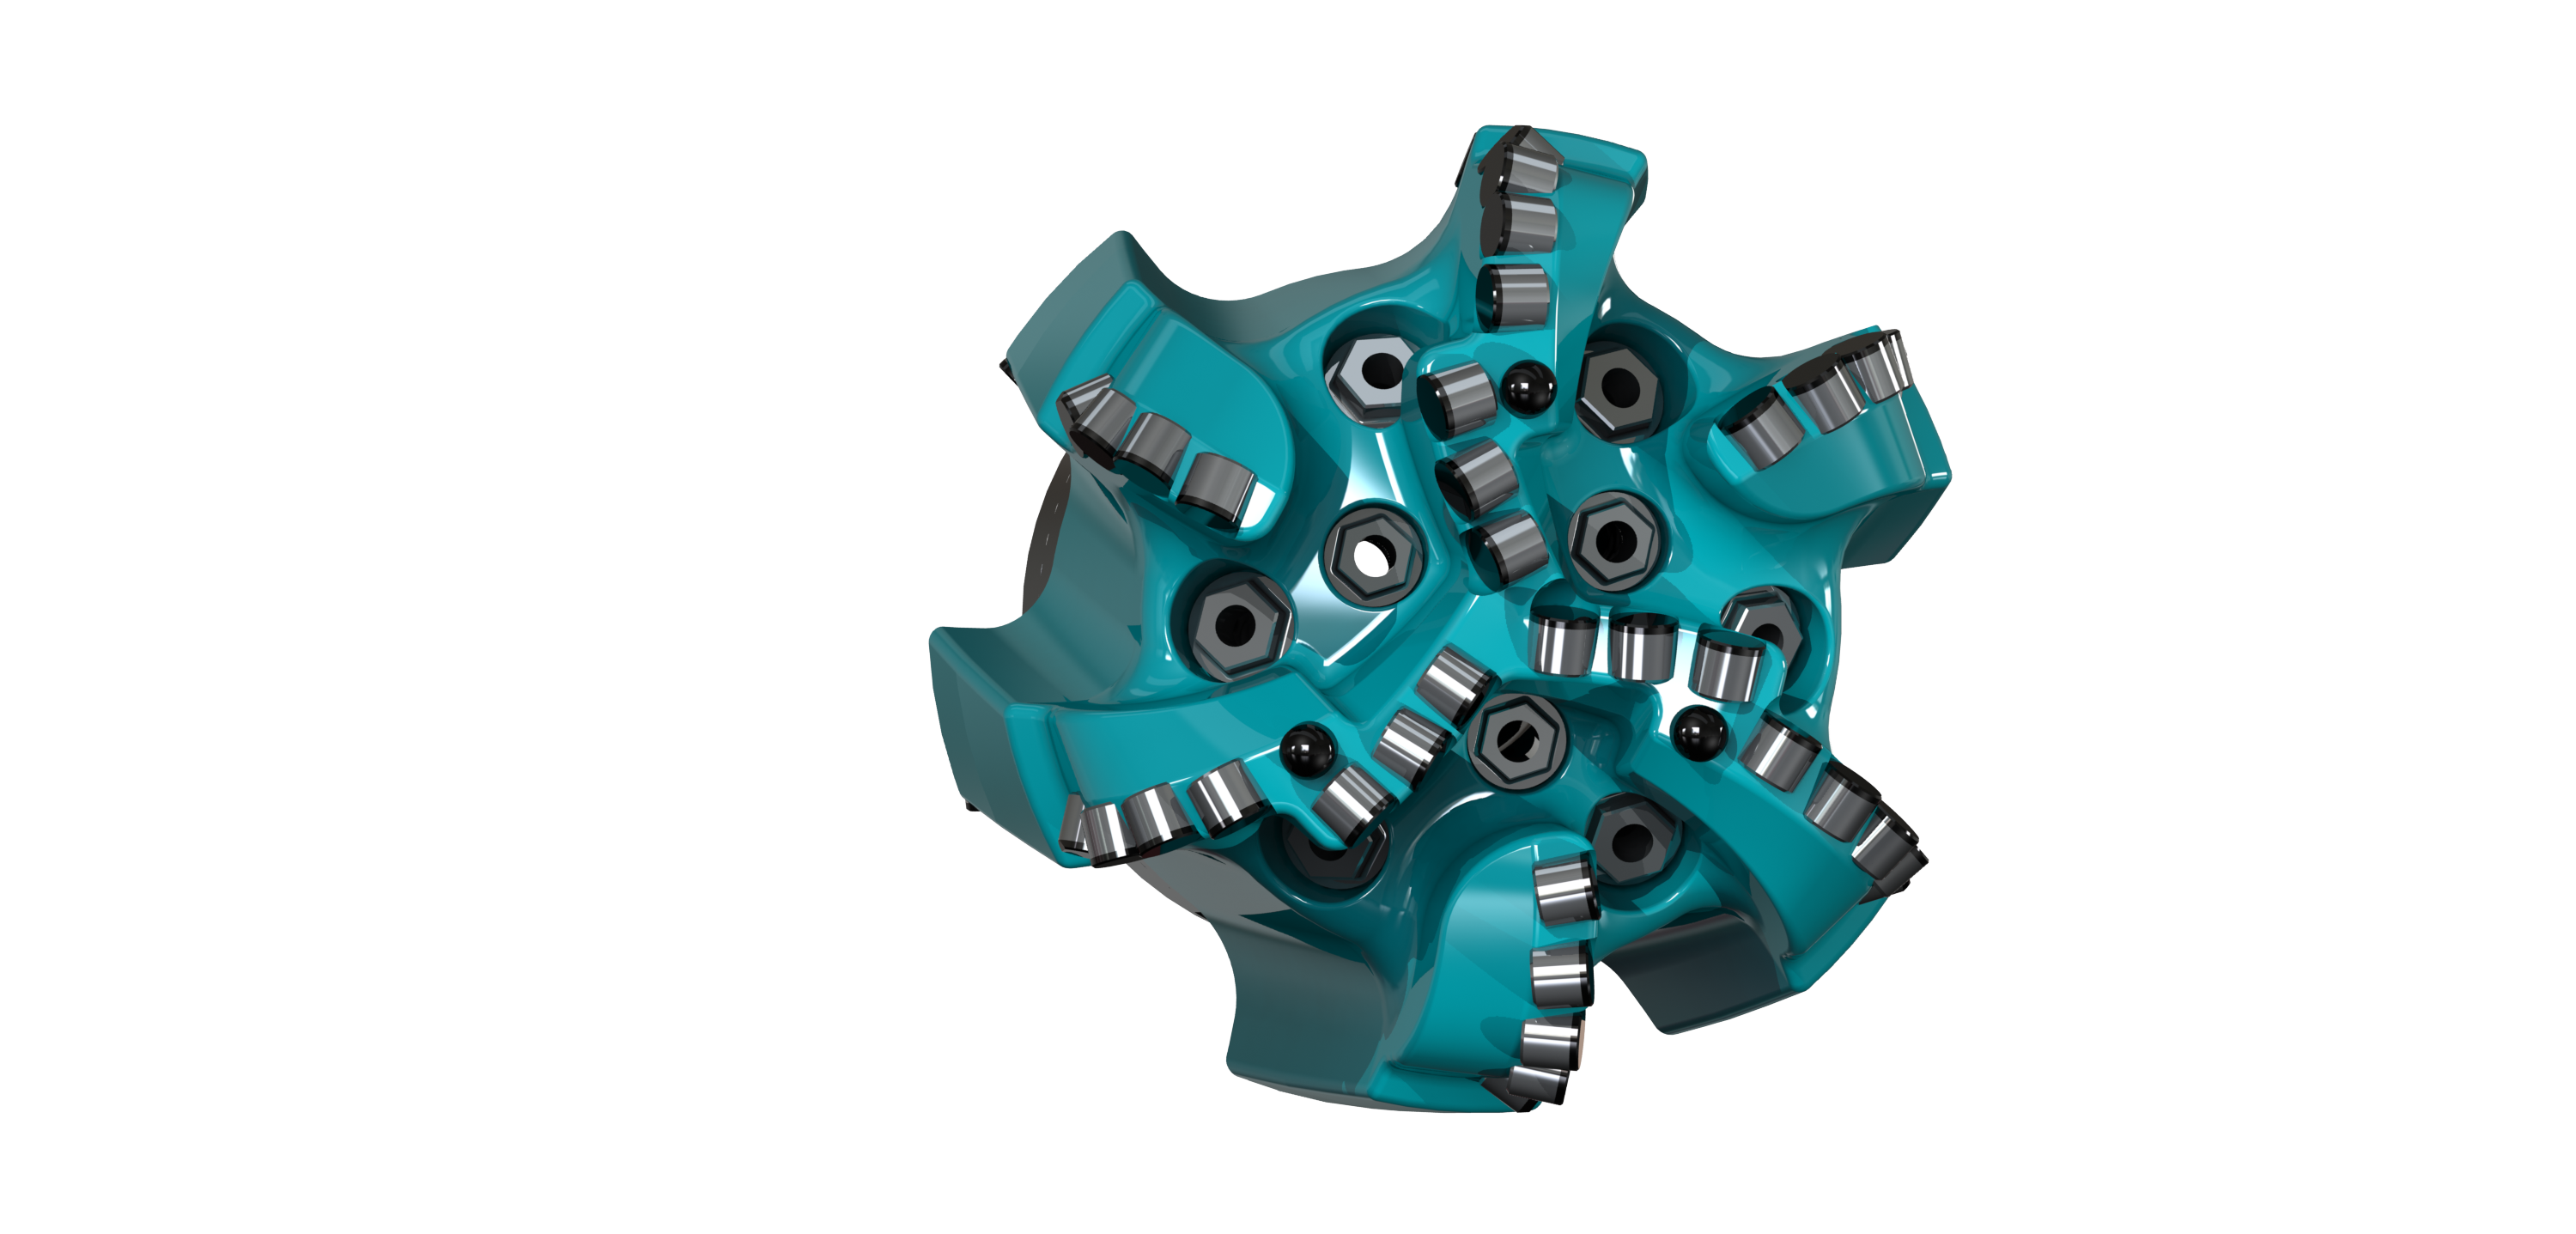 Ulterra’s SplitBlade PDC drillbit with advanced hydraulics and layout is designed for maximum performance. (Source: Ulterra)